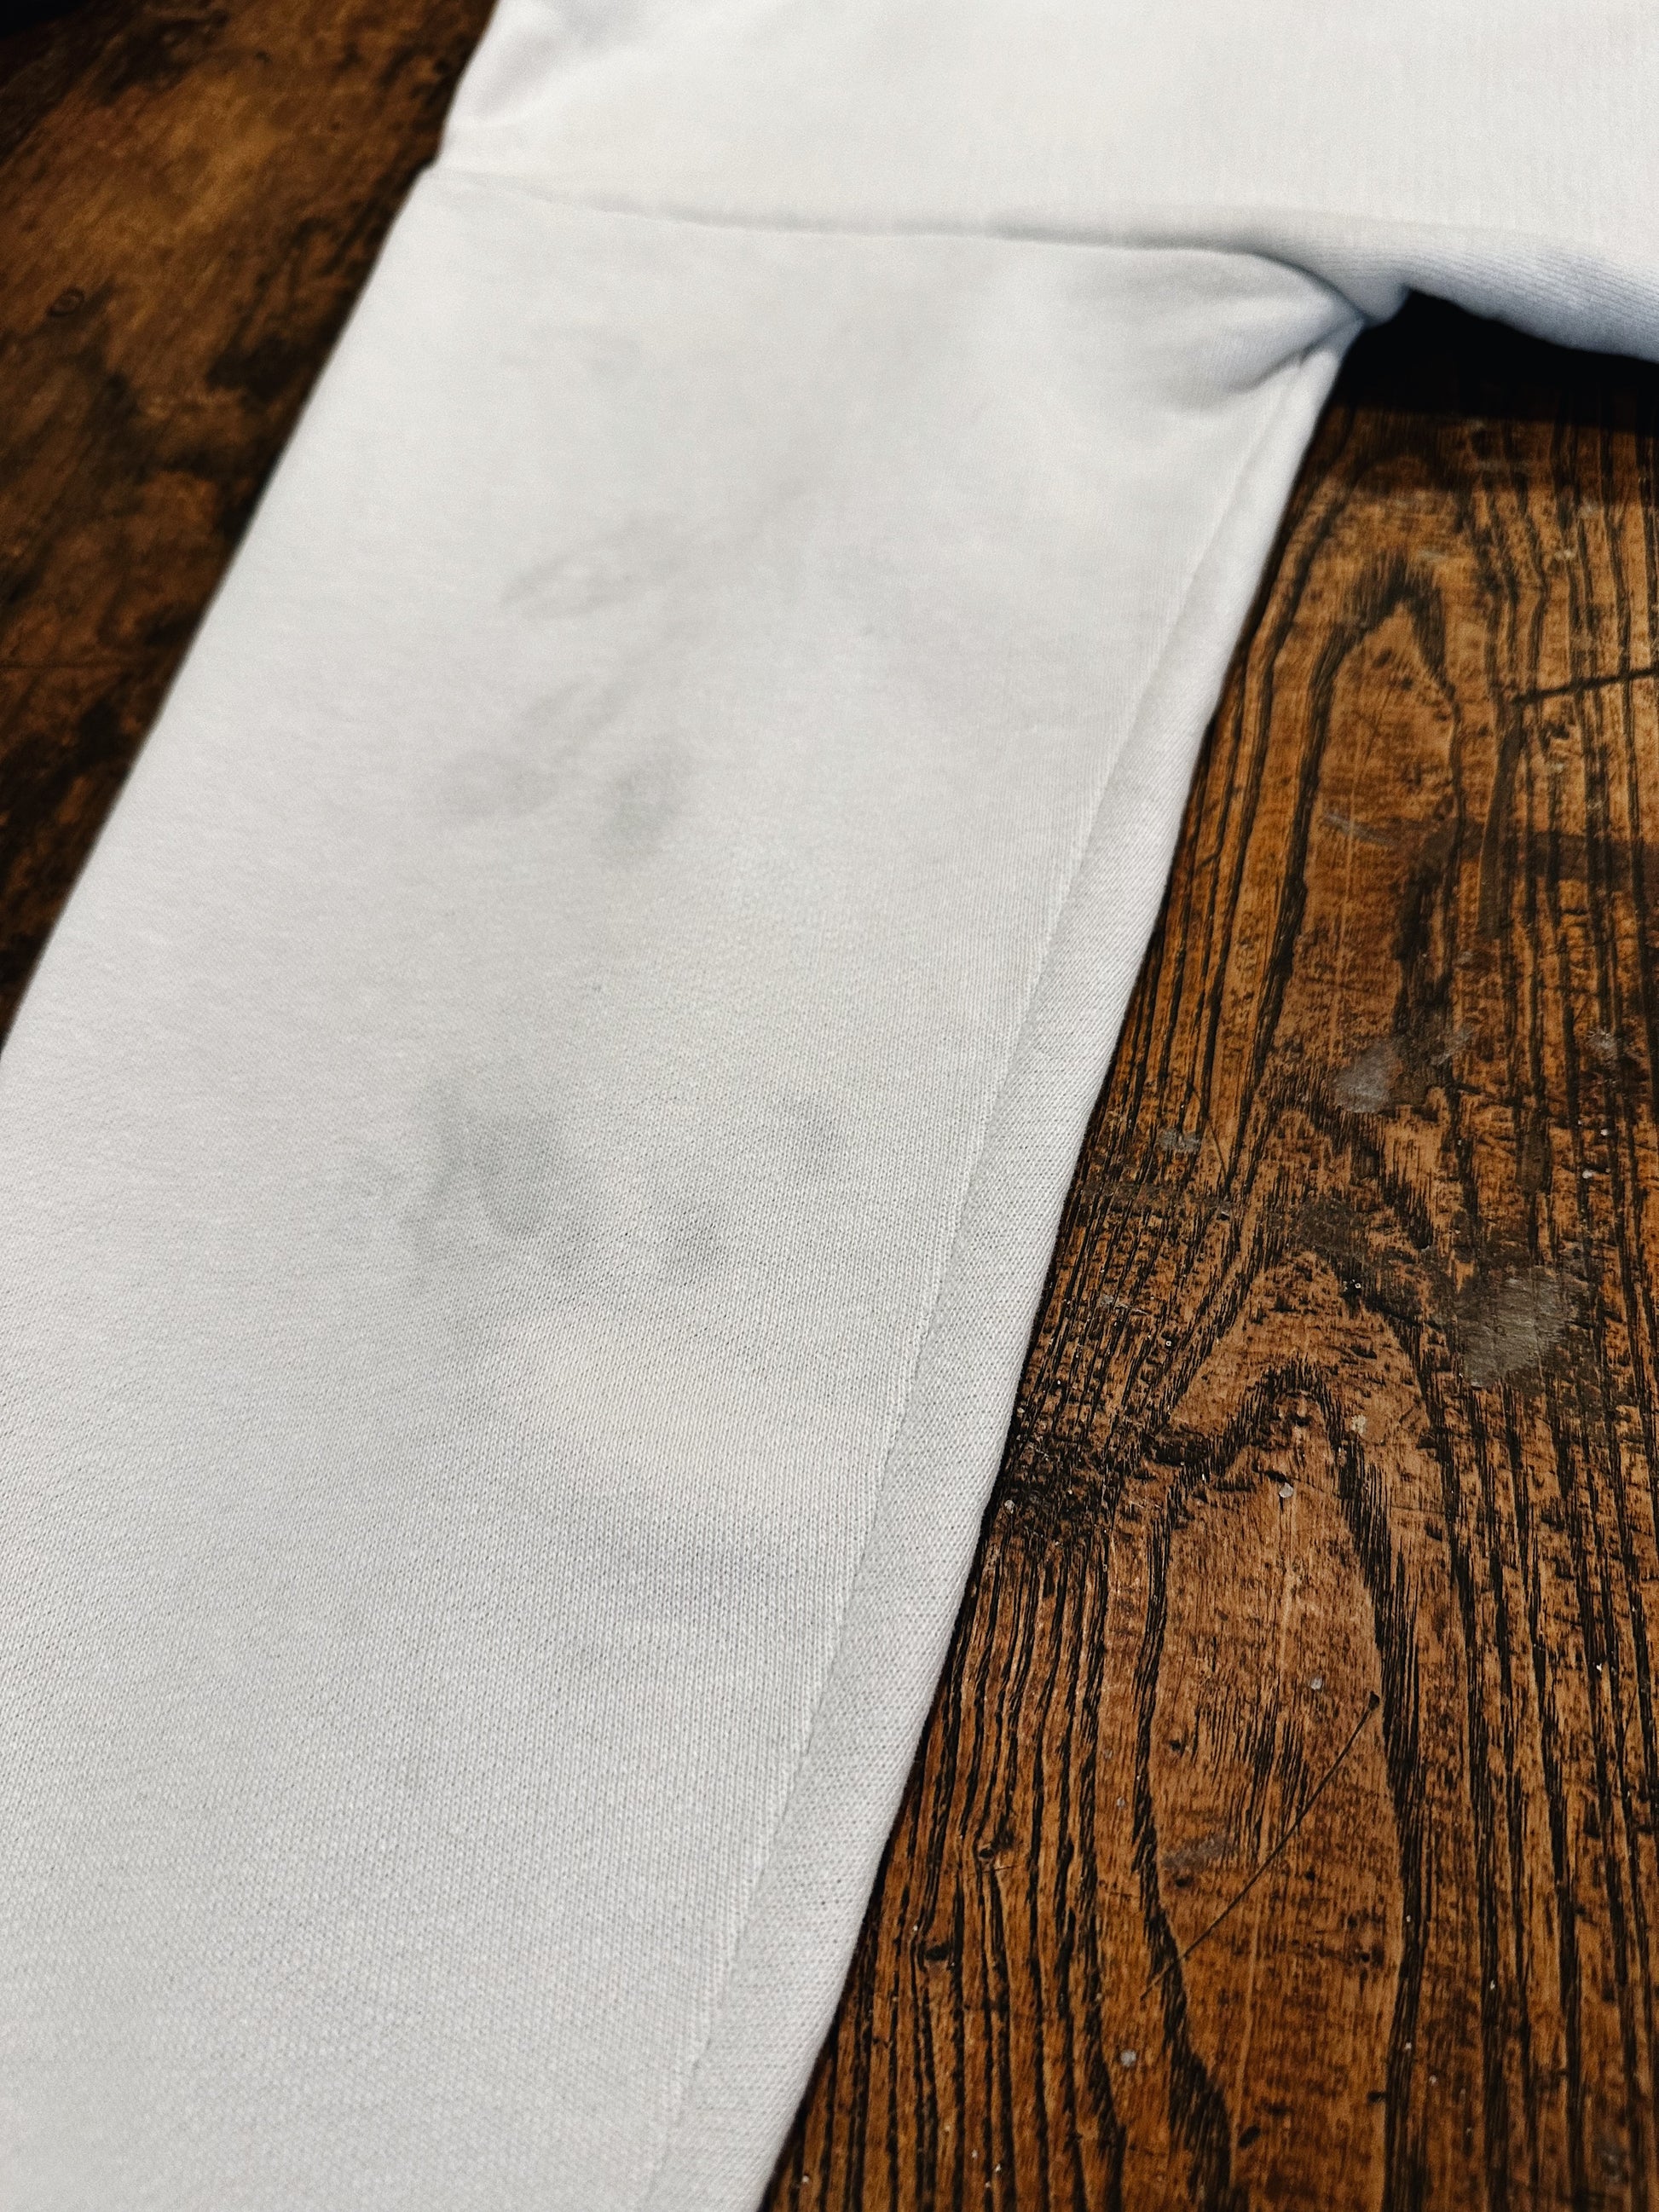 sweatshirt with some stains on sleeve 